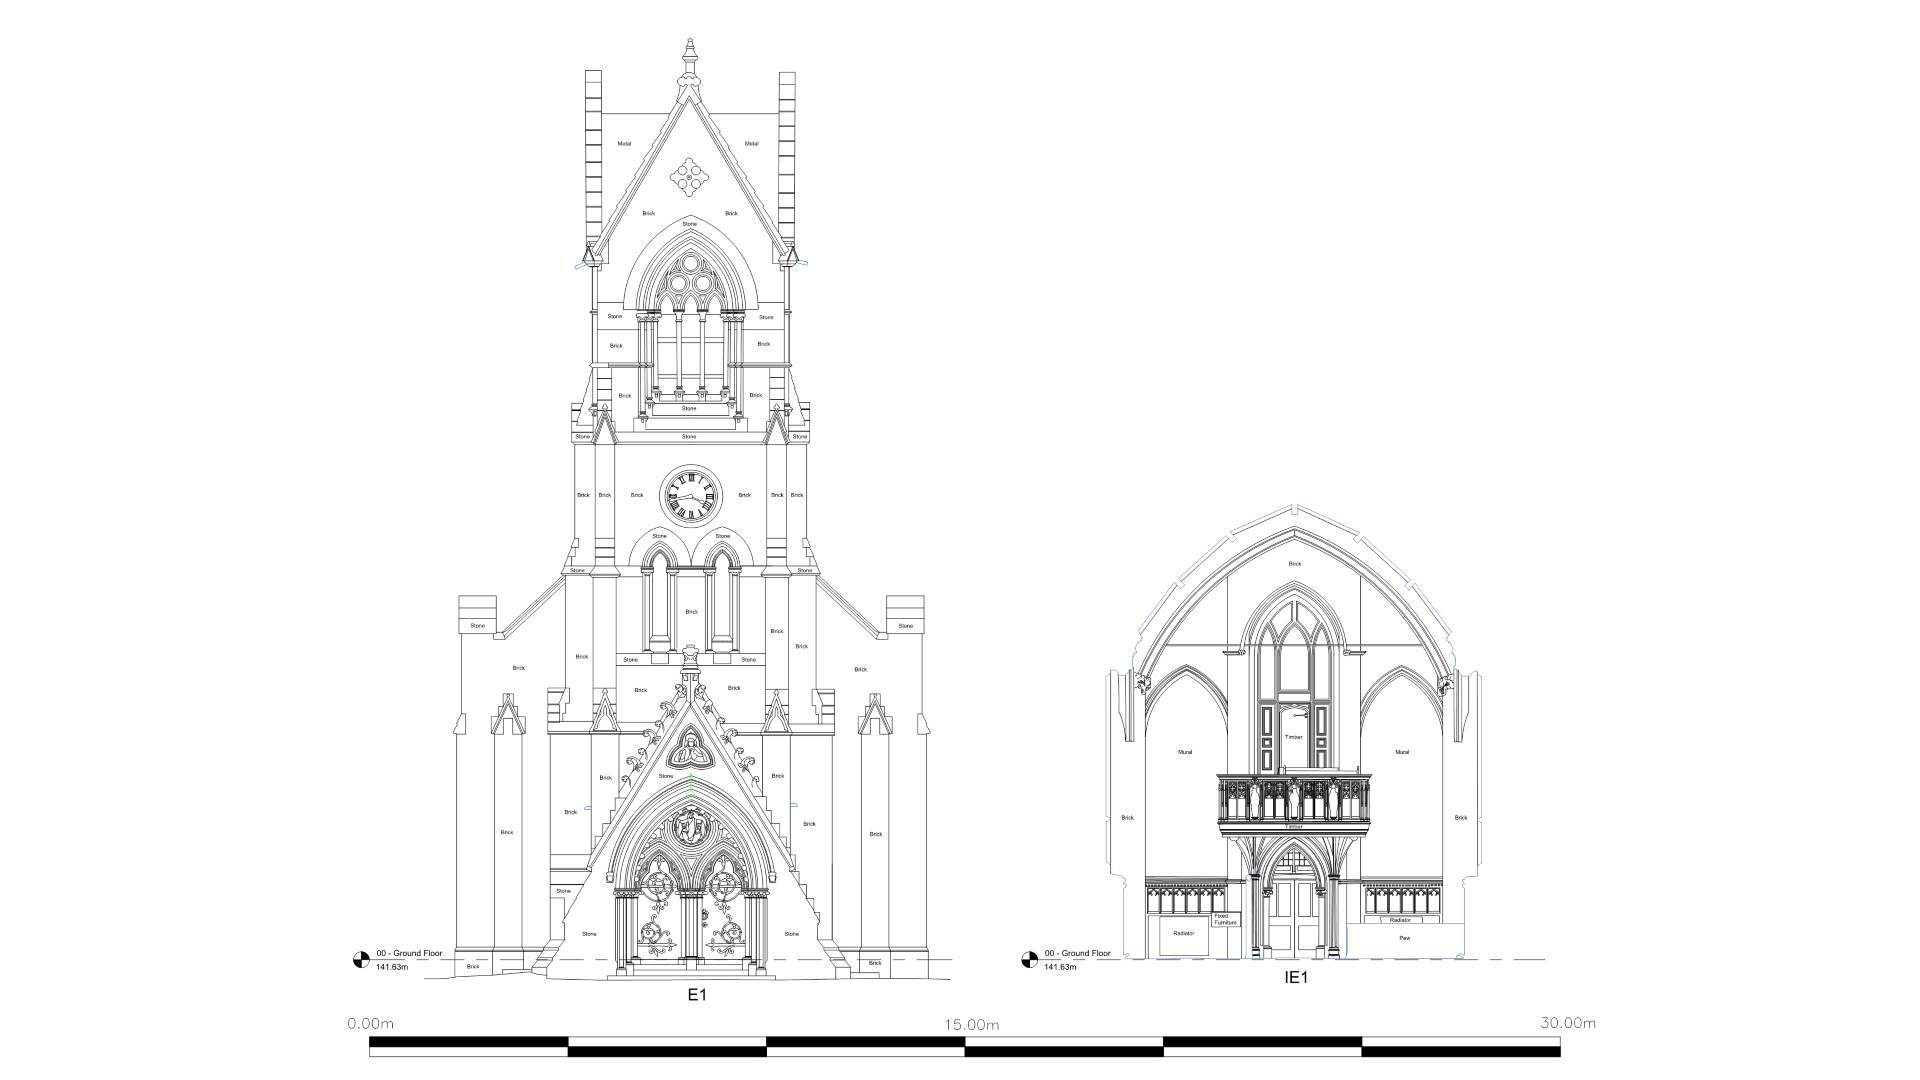 CAD drawing showing high detail internal & external elevations of a church.